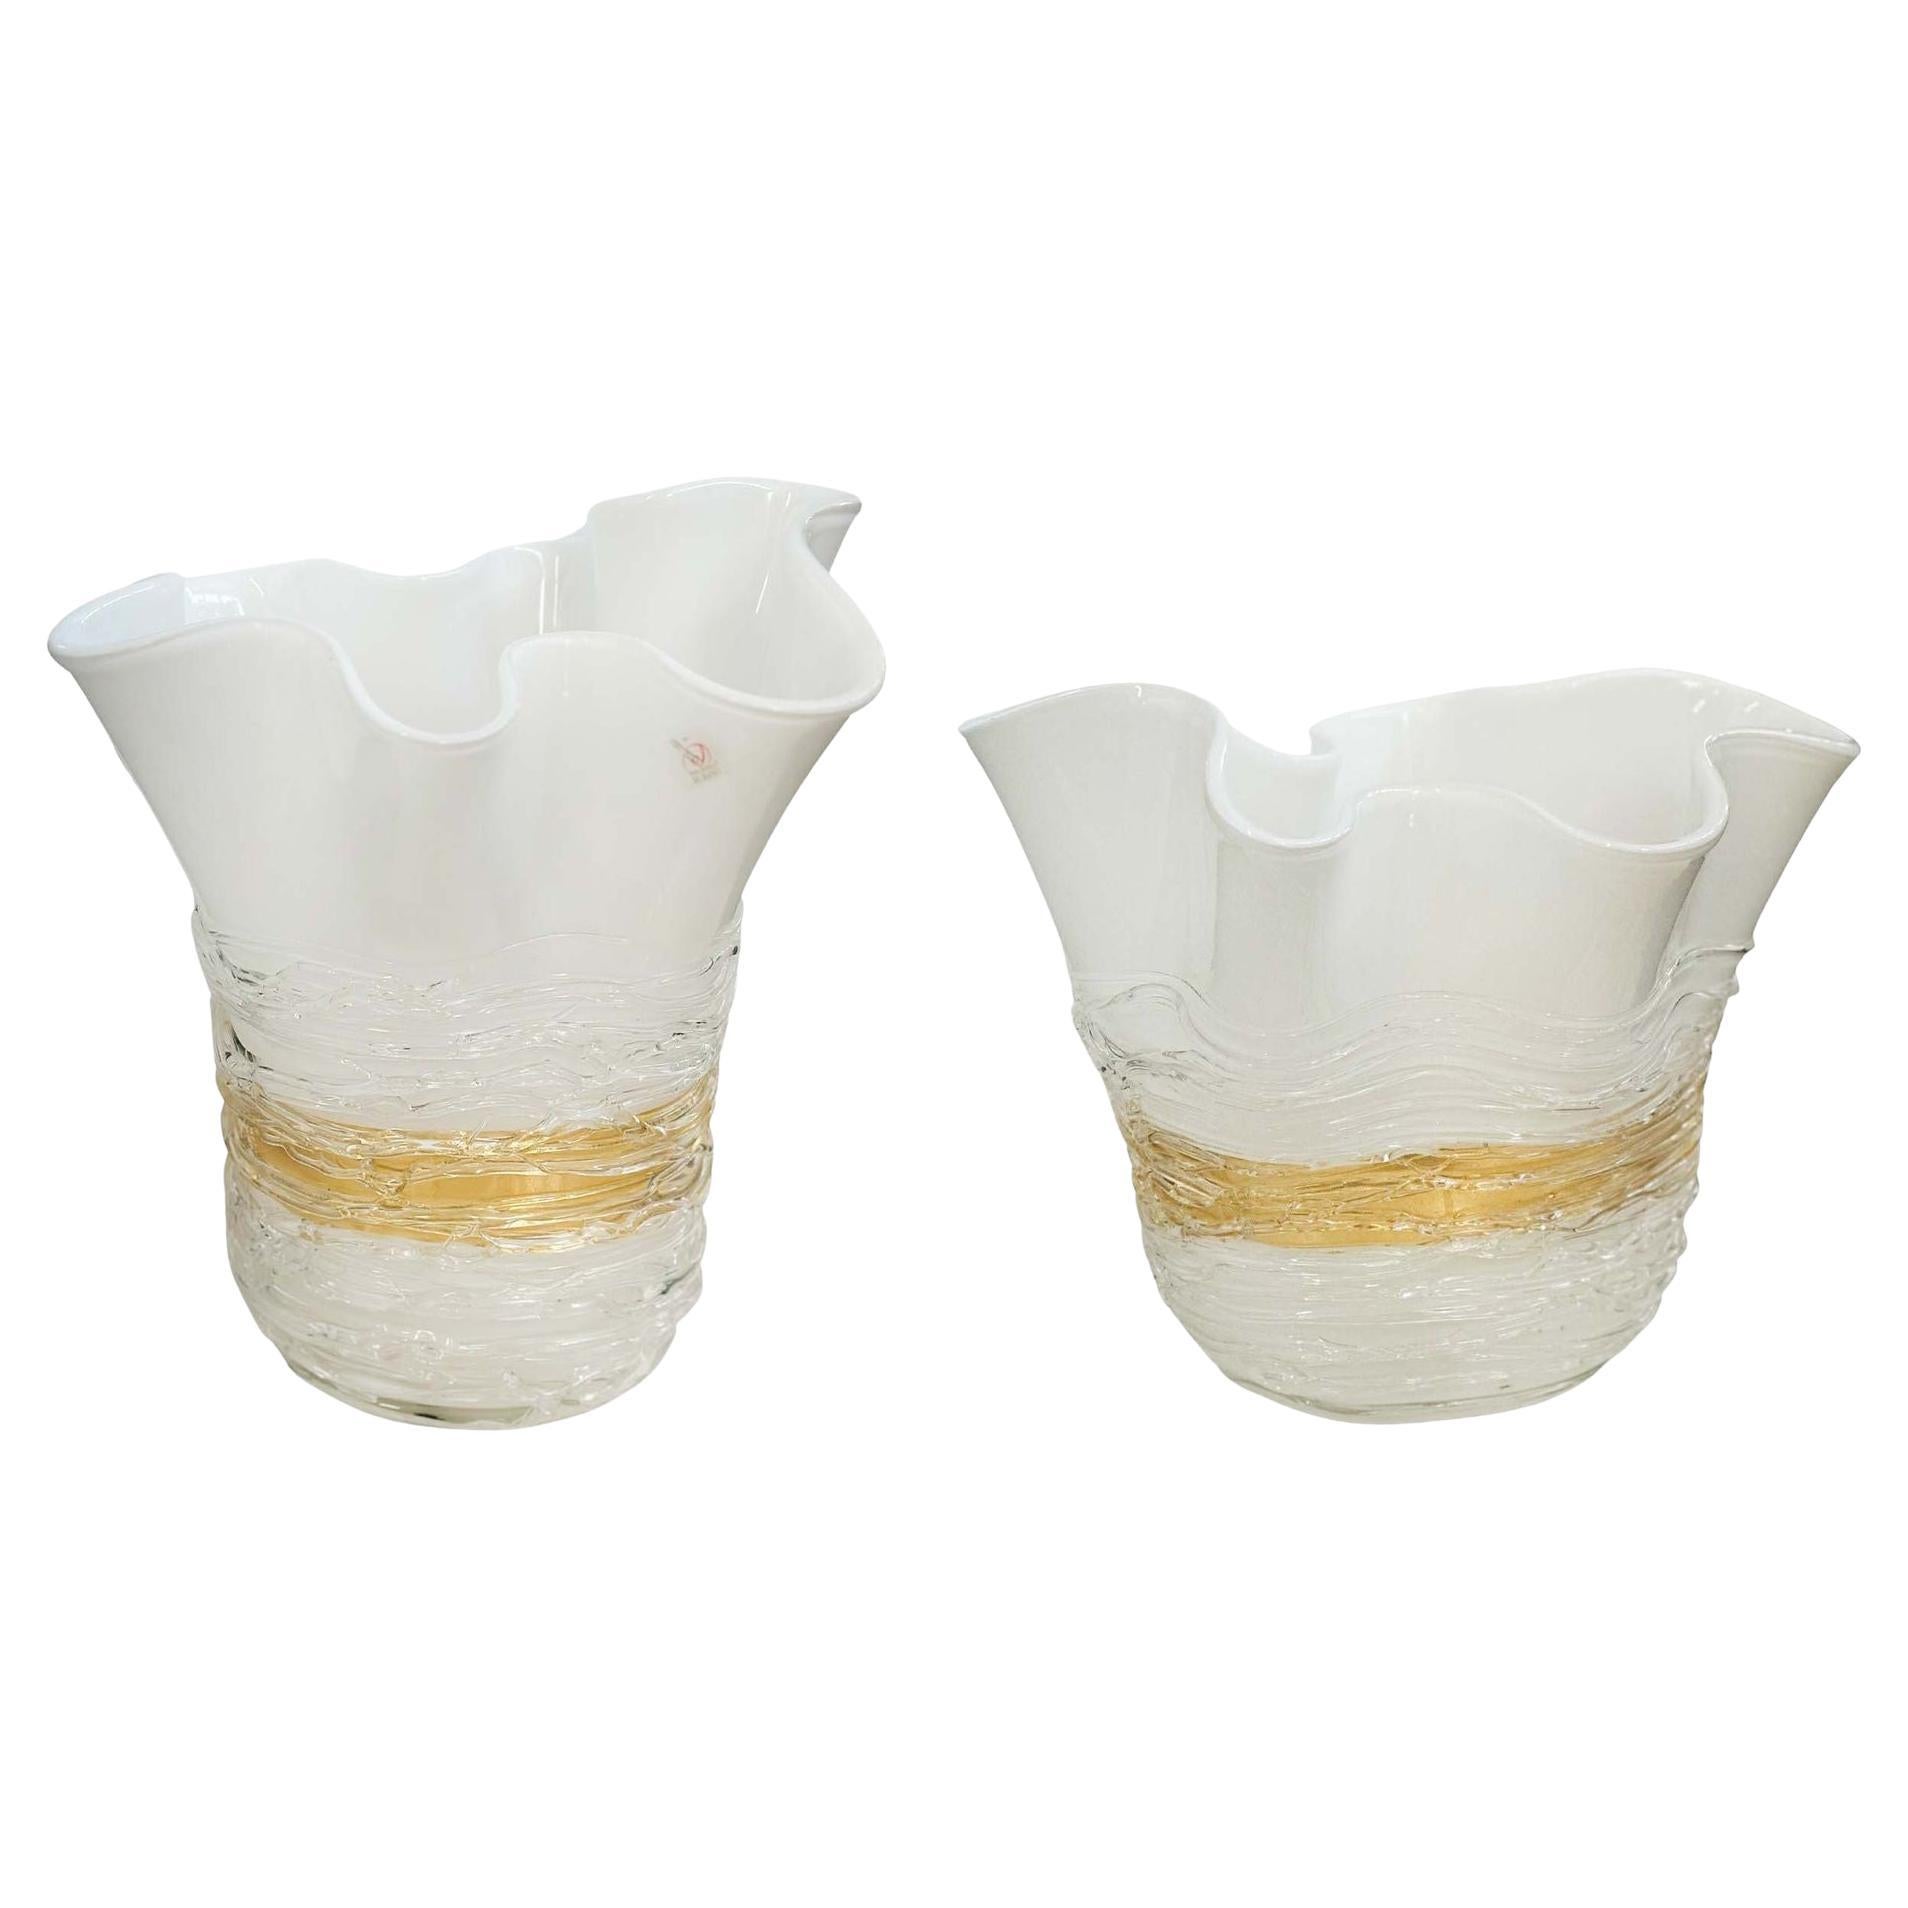 Pair of Handblown Ruffled Murano Glass Vases by Camozzo For Sale